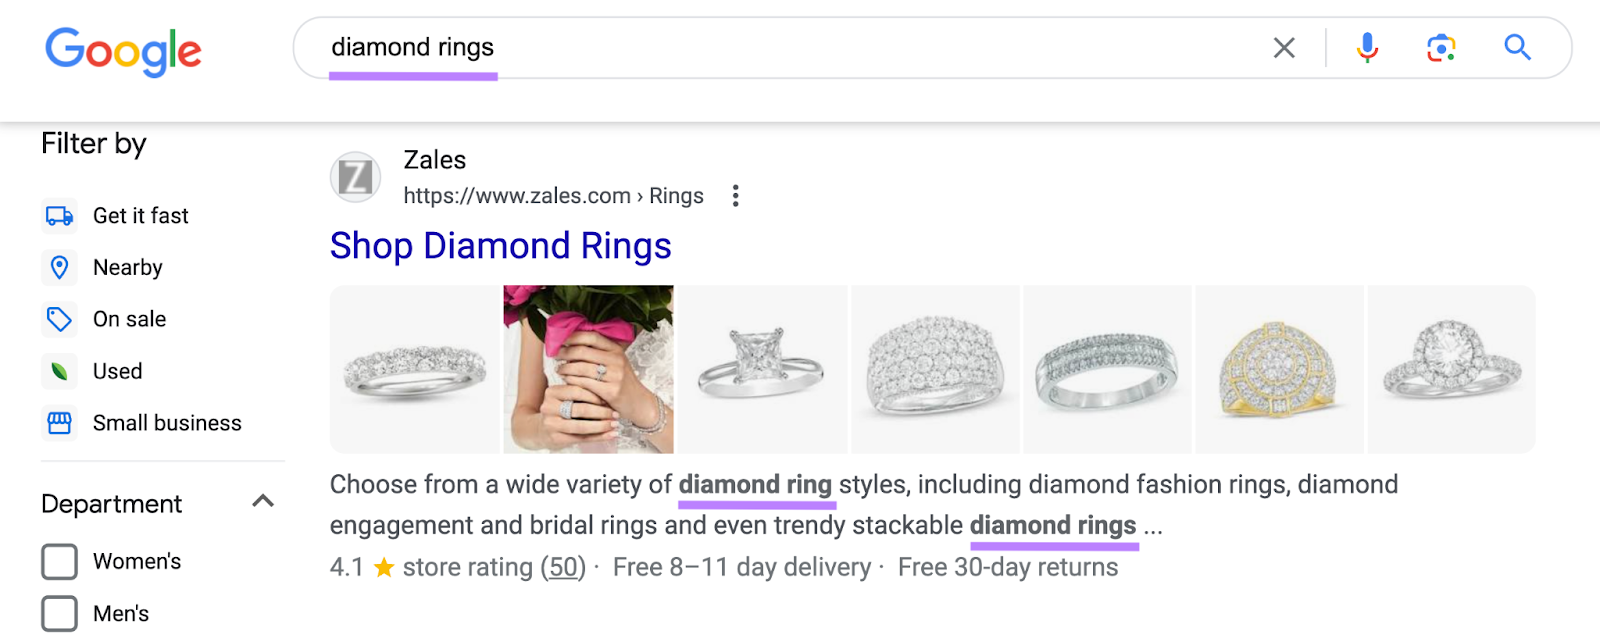 A Google result for "diamond rings." The terms "diamond ring" and "diamond rings" are bolded in the result's description.